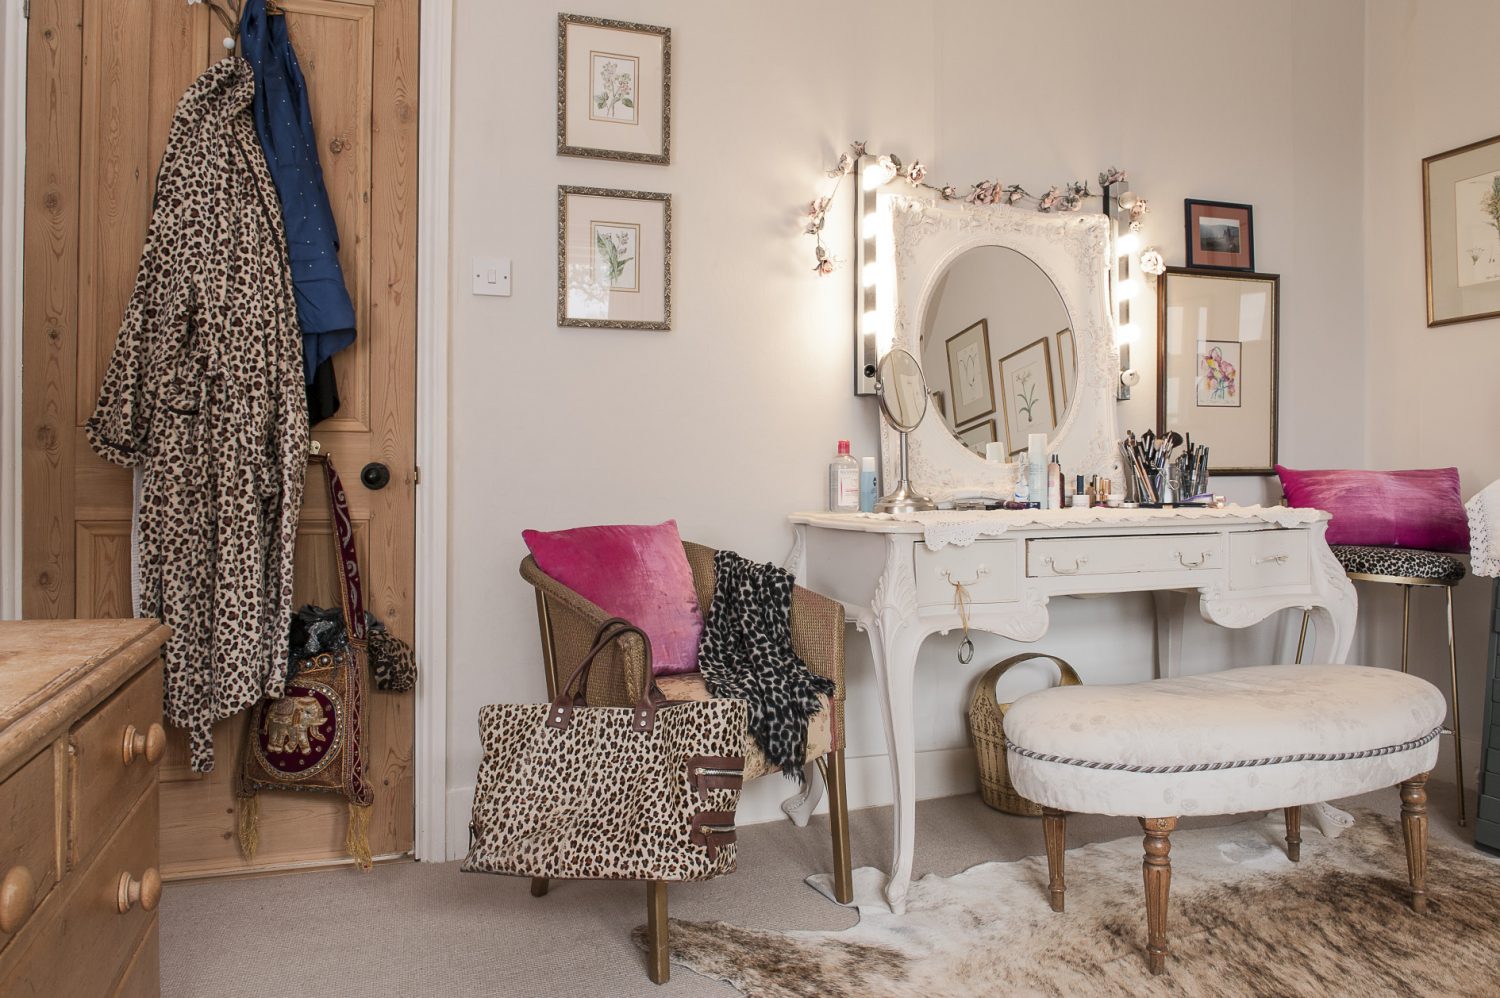 Alli offers bridal make-up and one-on-one make-up lessons in her make-up room. The dressing table is an elegant old French desk from ’Tasha Interiors, the walls are Little Greene Joanna 130 and the woodwork is Little Greene Linen Wash 33